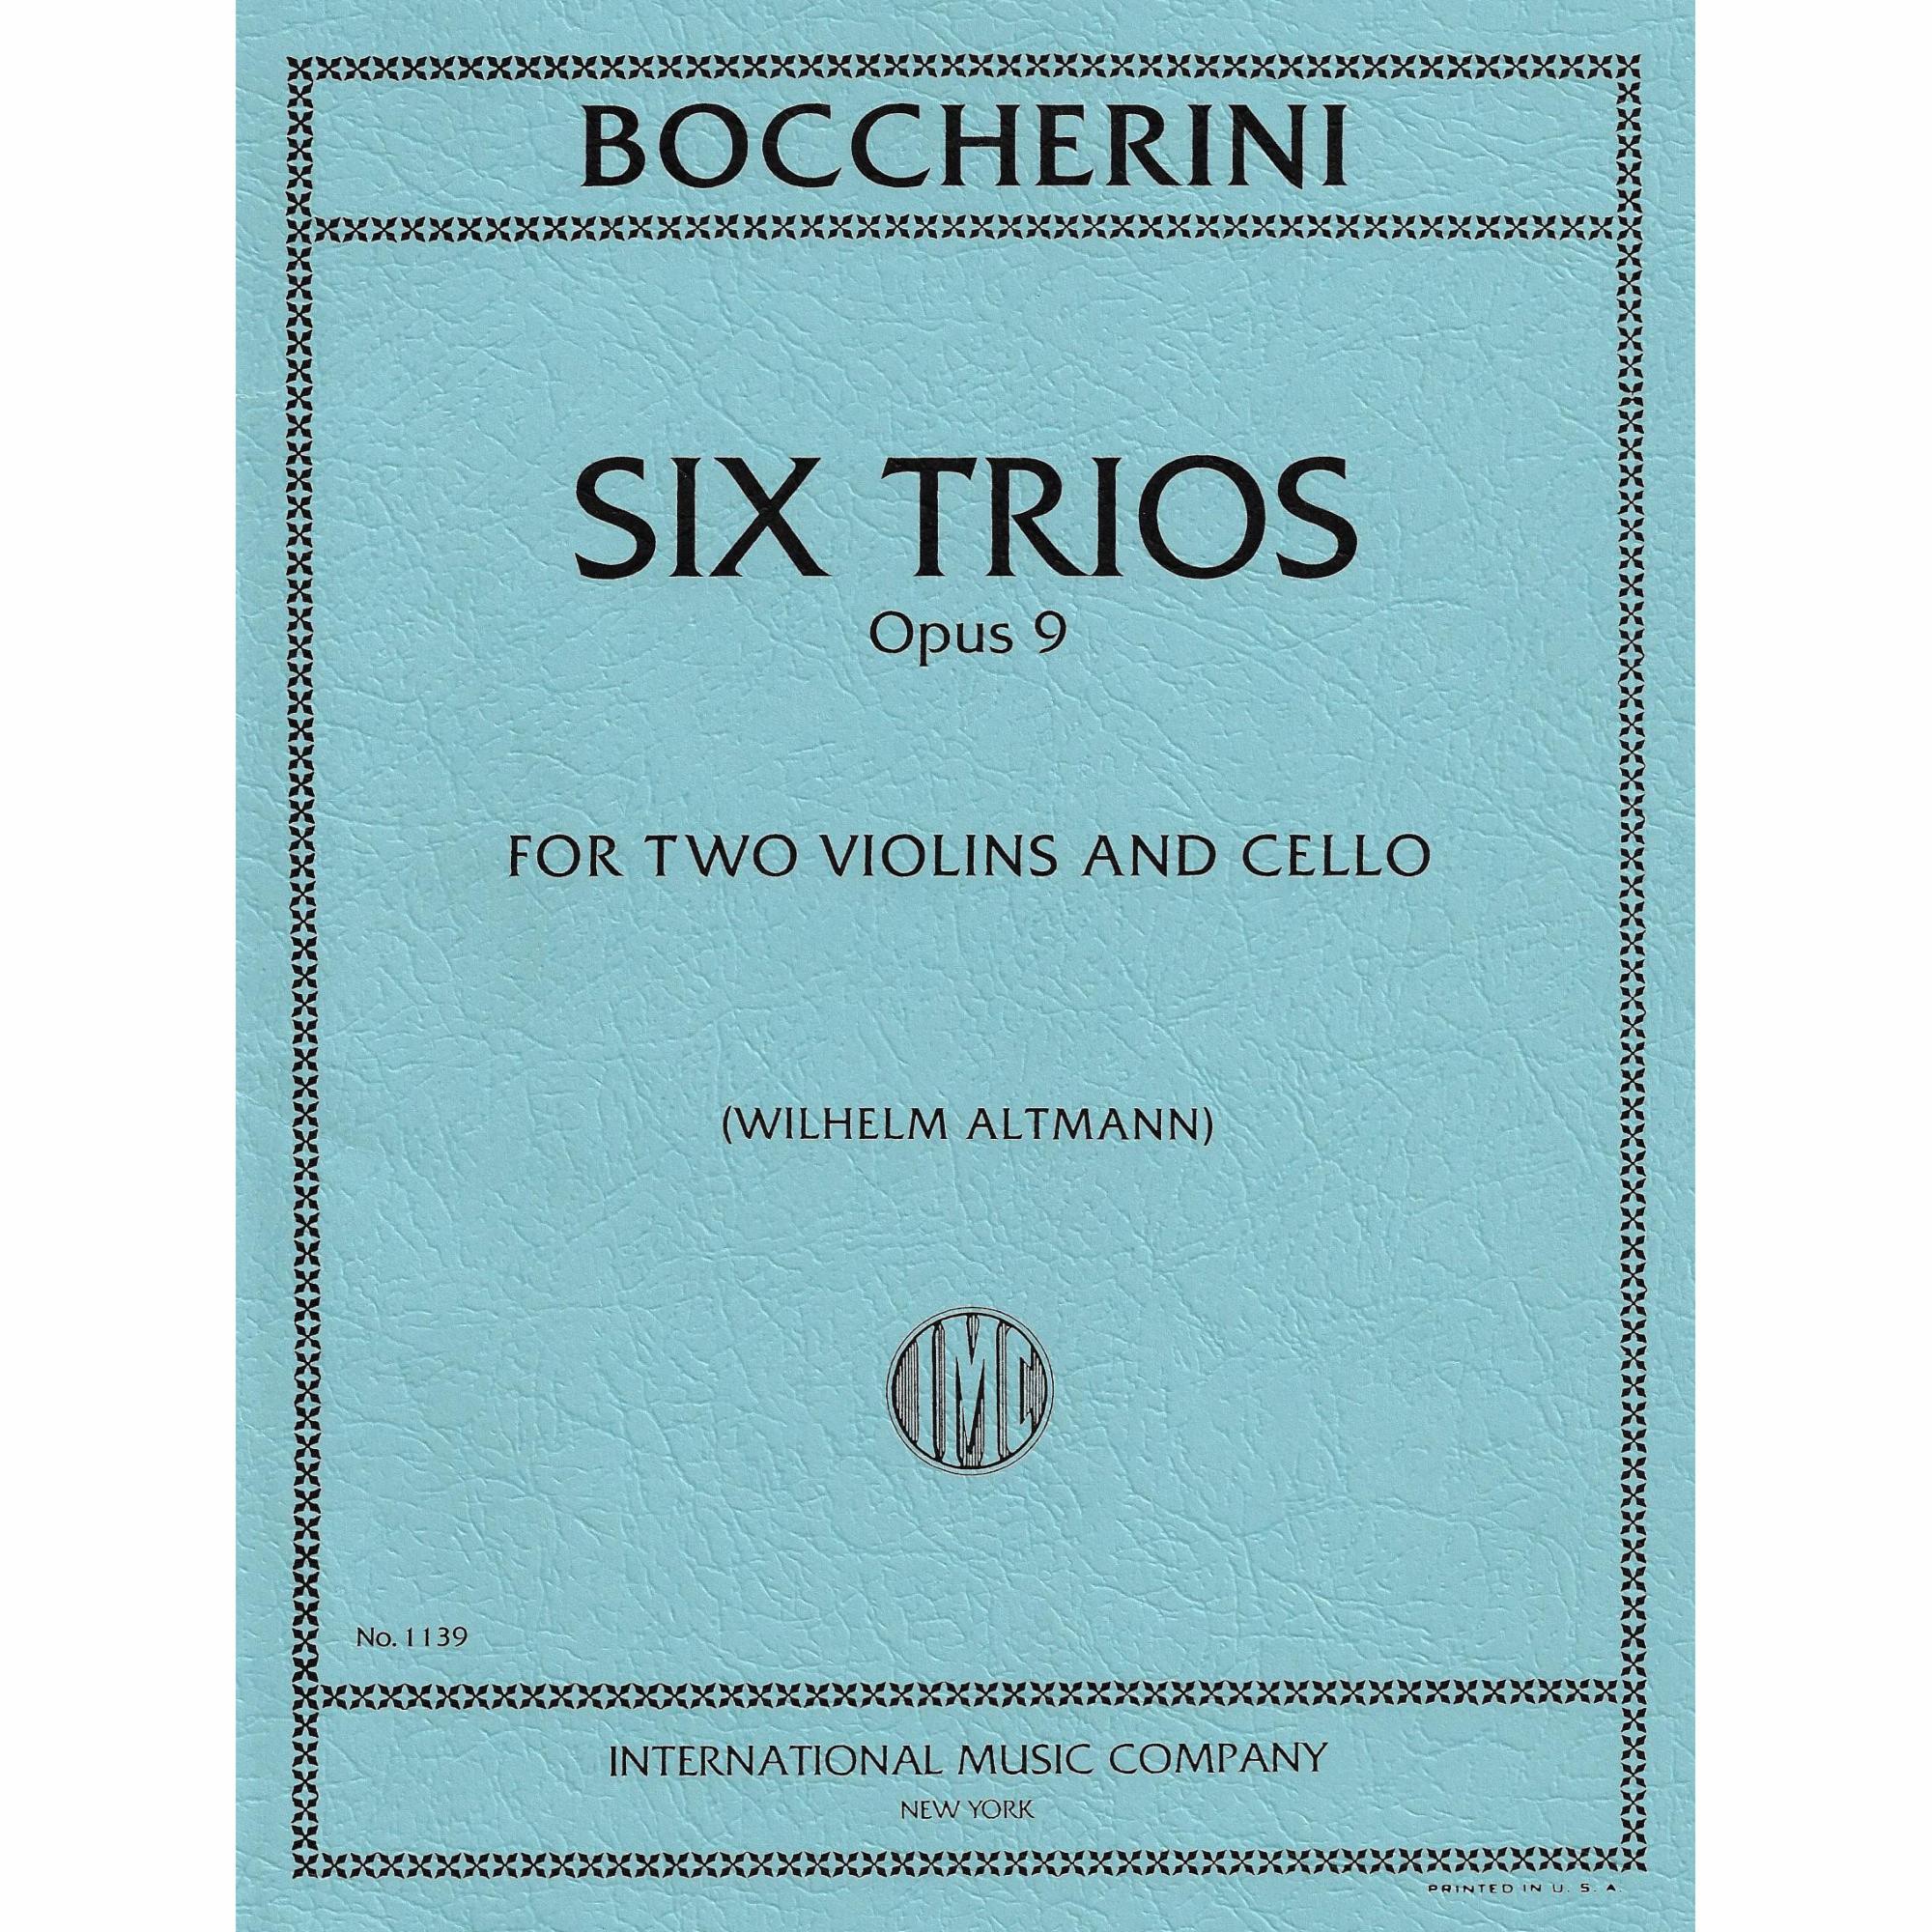 Boccherini -- Six Trios, Op. 9 for Two Violins and Cello